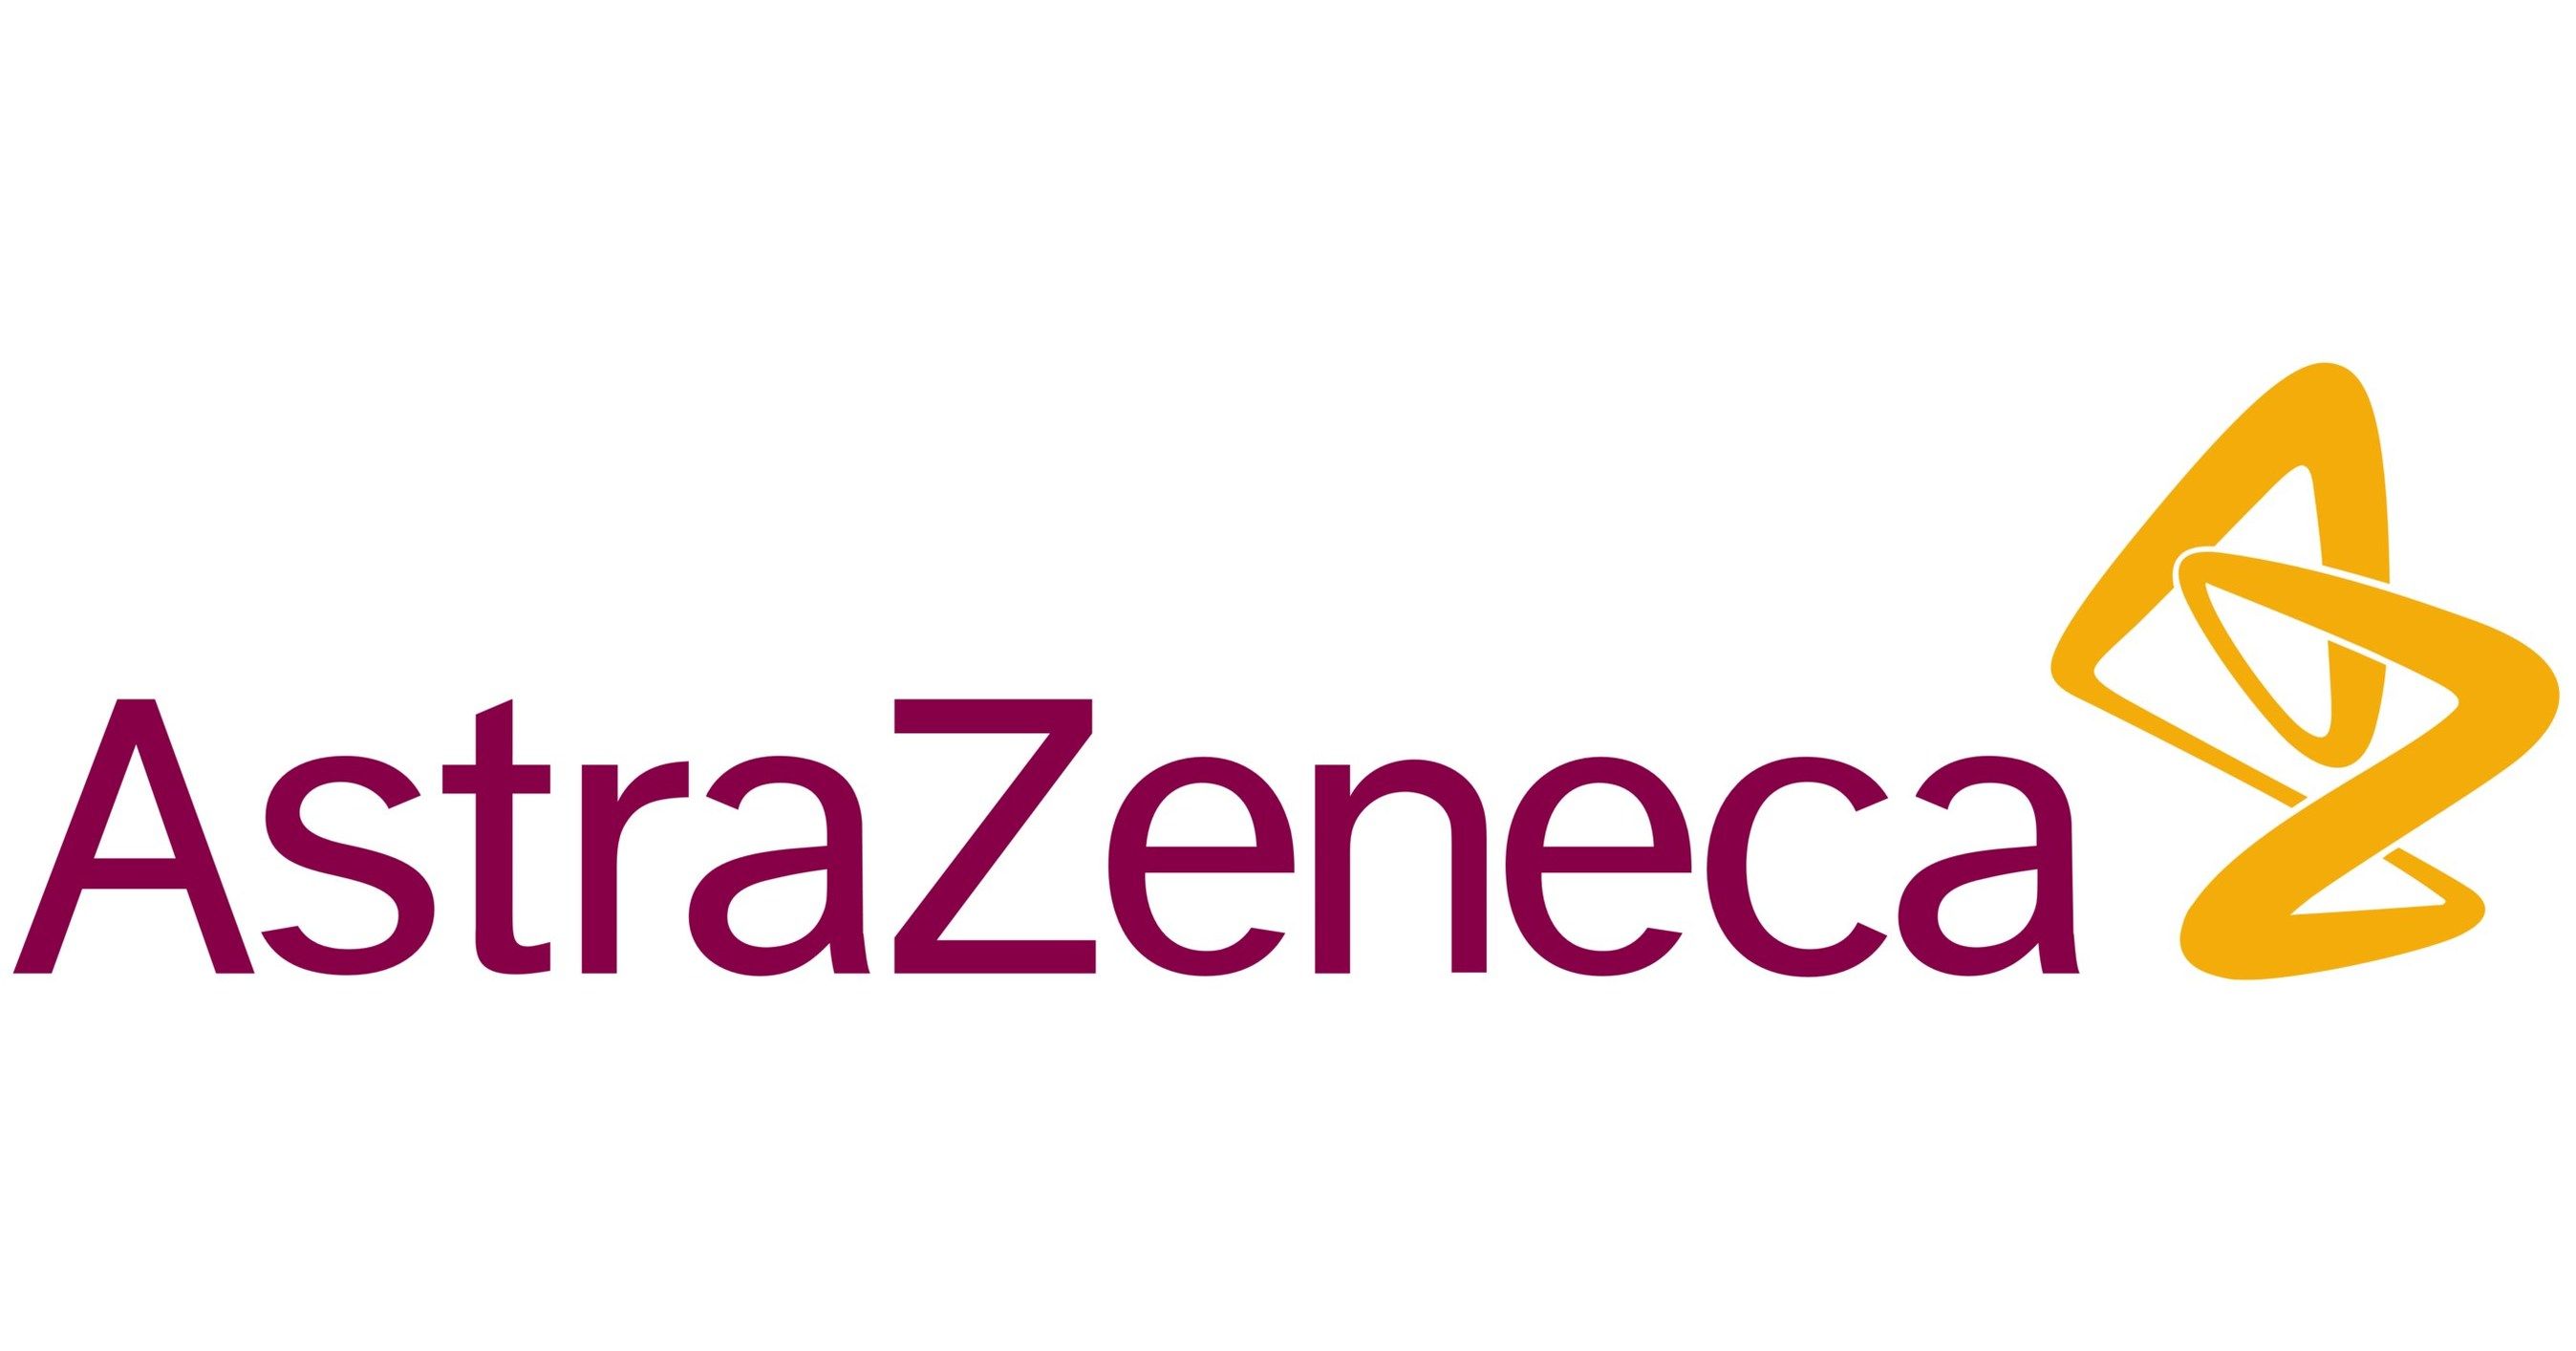 Astrazeneca medical corporate by Thierry Legrand